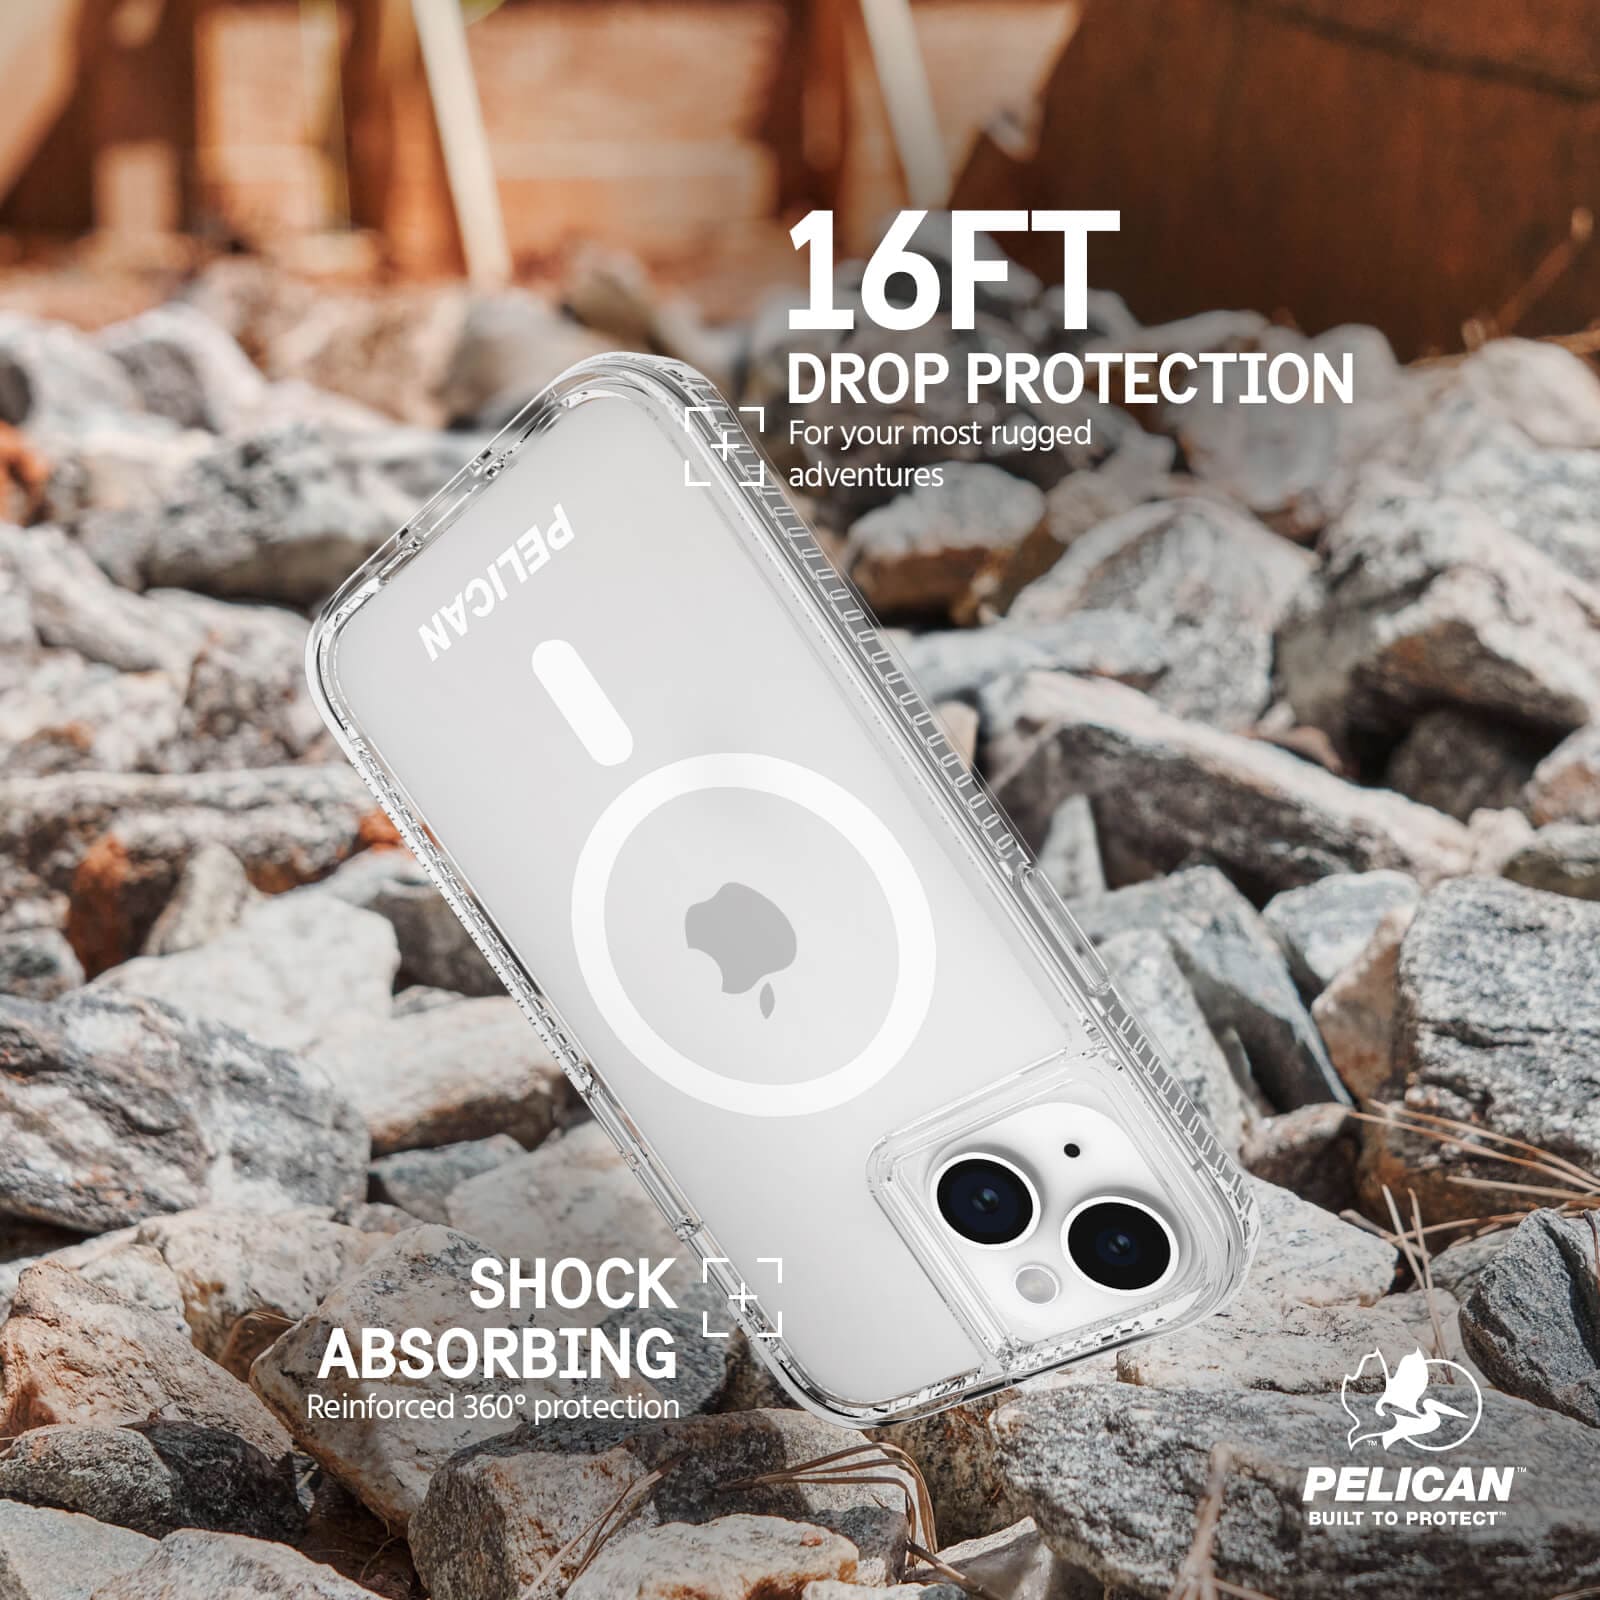 16FT DROP PROTECTION FOR YOUR MOST RUGGED ADVENTURES. SHOCK ABSORBING REINFORCED 360 DEGREE PROTECTION. 